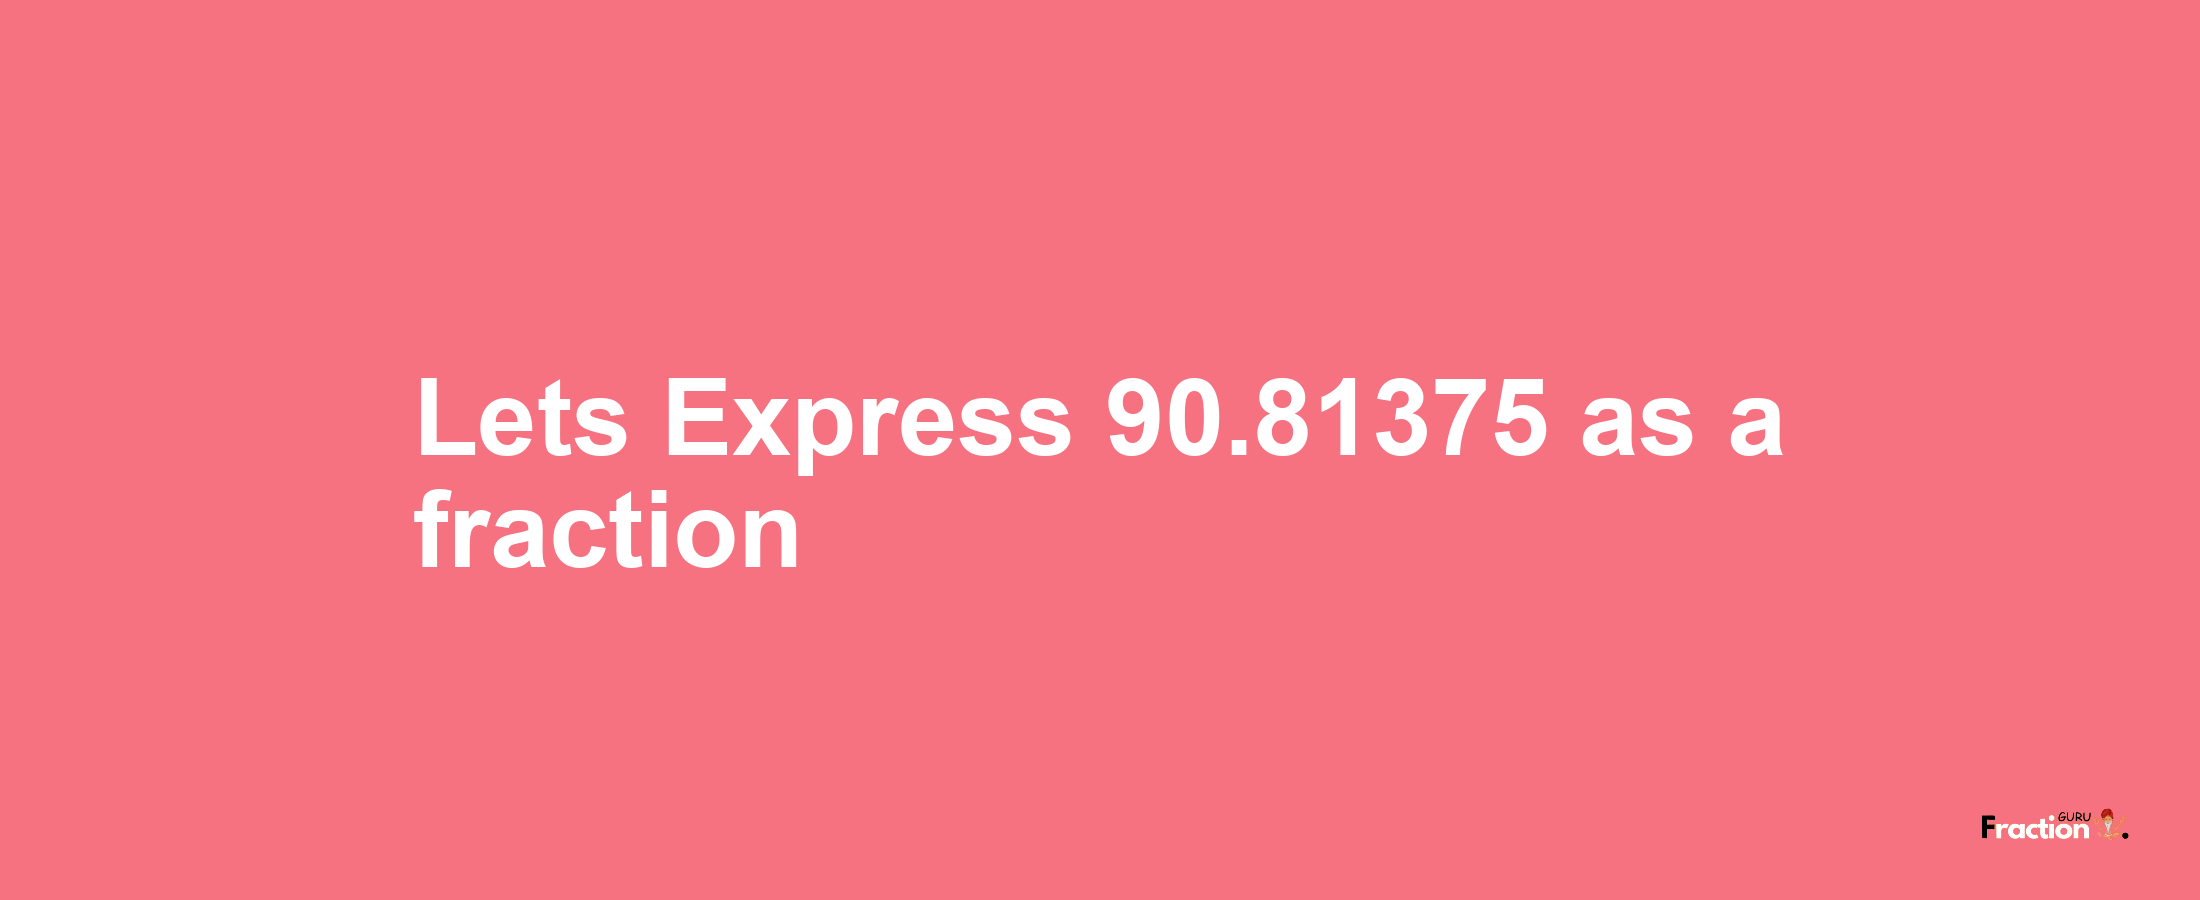 Lets Express 90.81375 as afraction